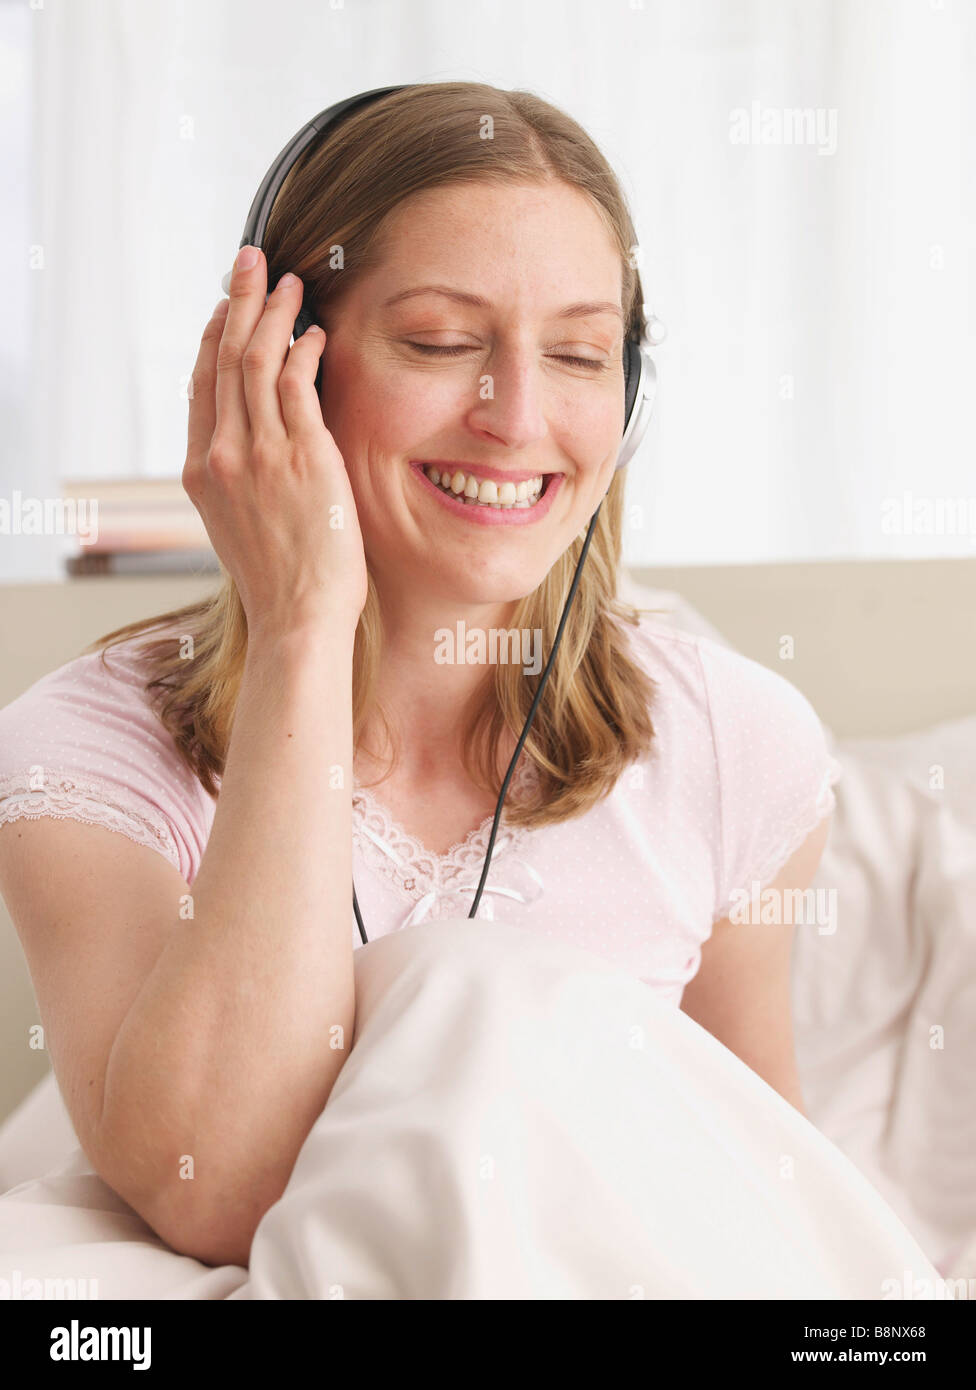 young woman listening music Stock Photo